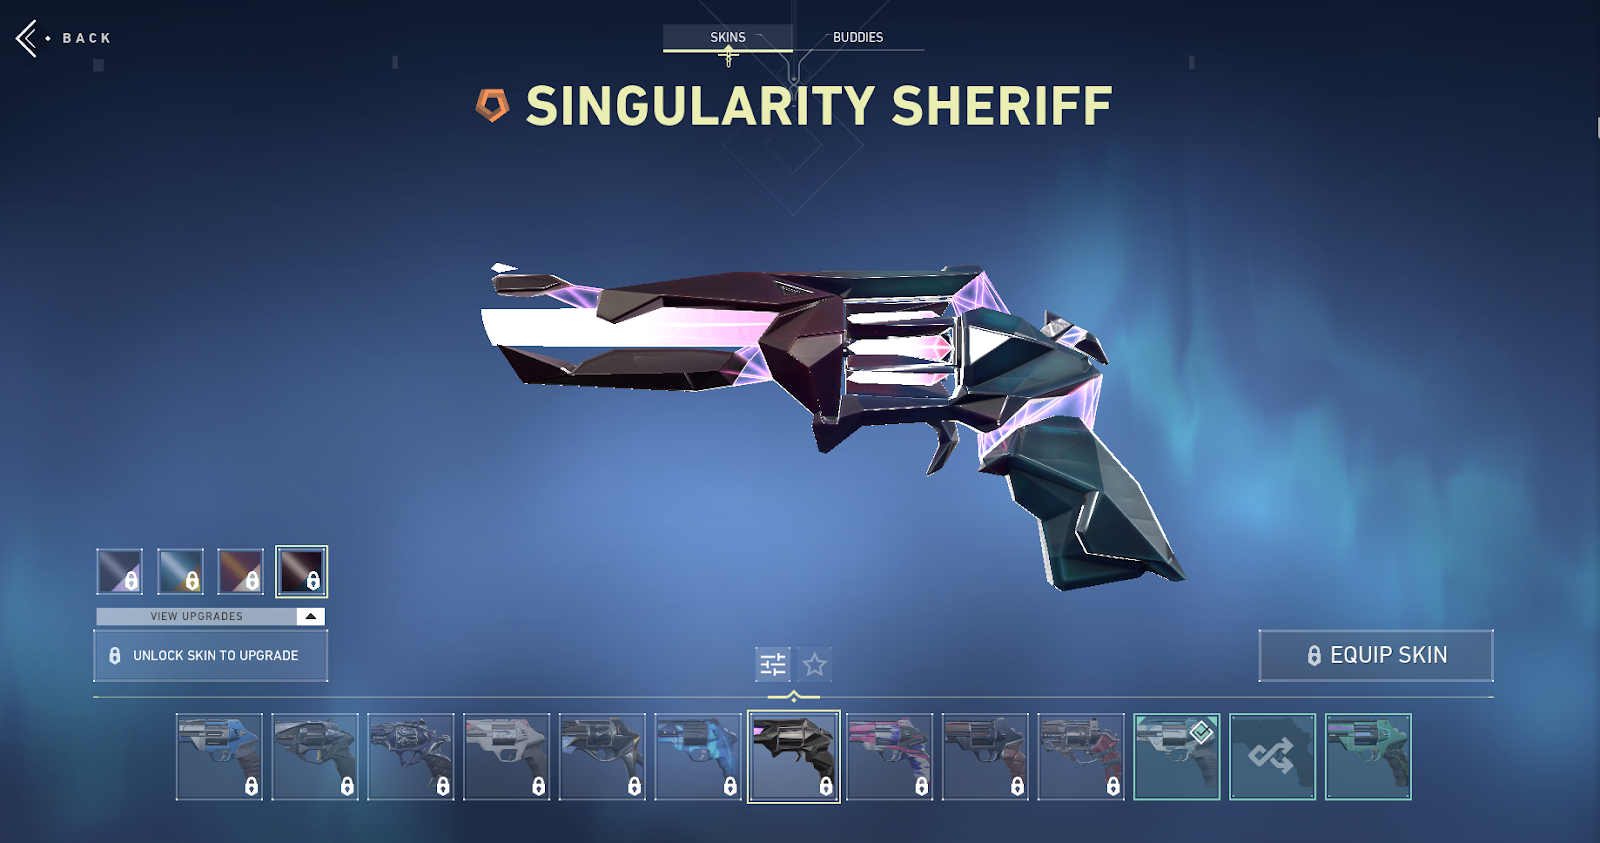 The Singularity Sheriff is one of the oldest weapon skins in Valorant, iconic for it's crystalline aesthetic